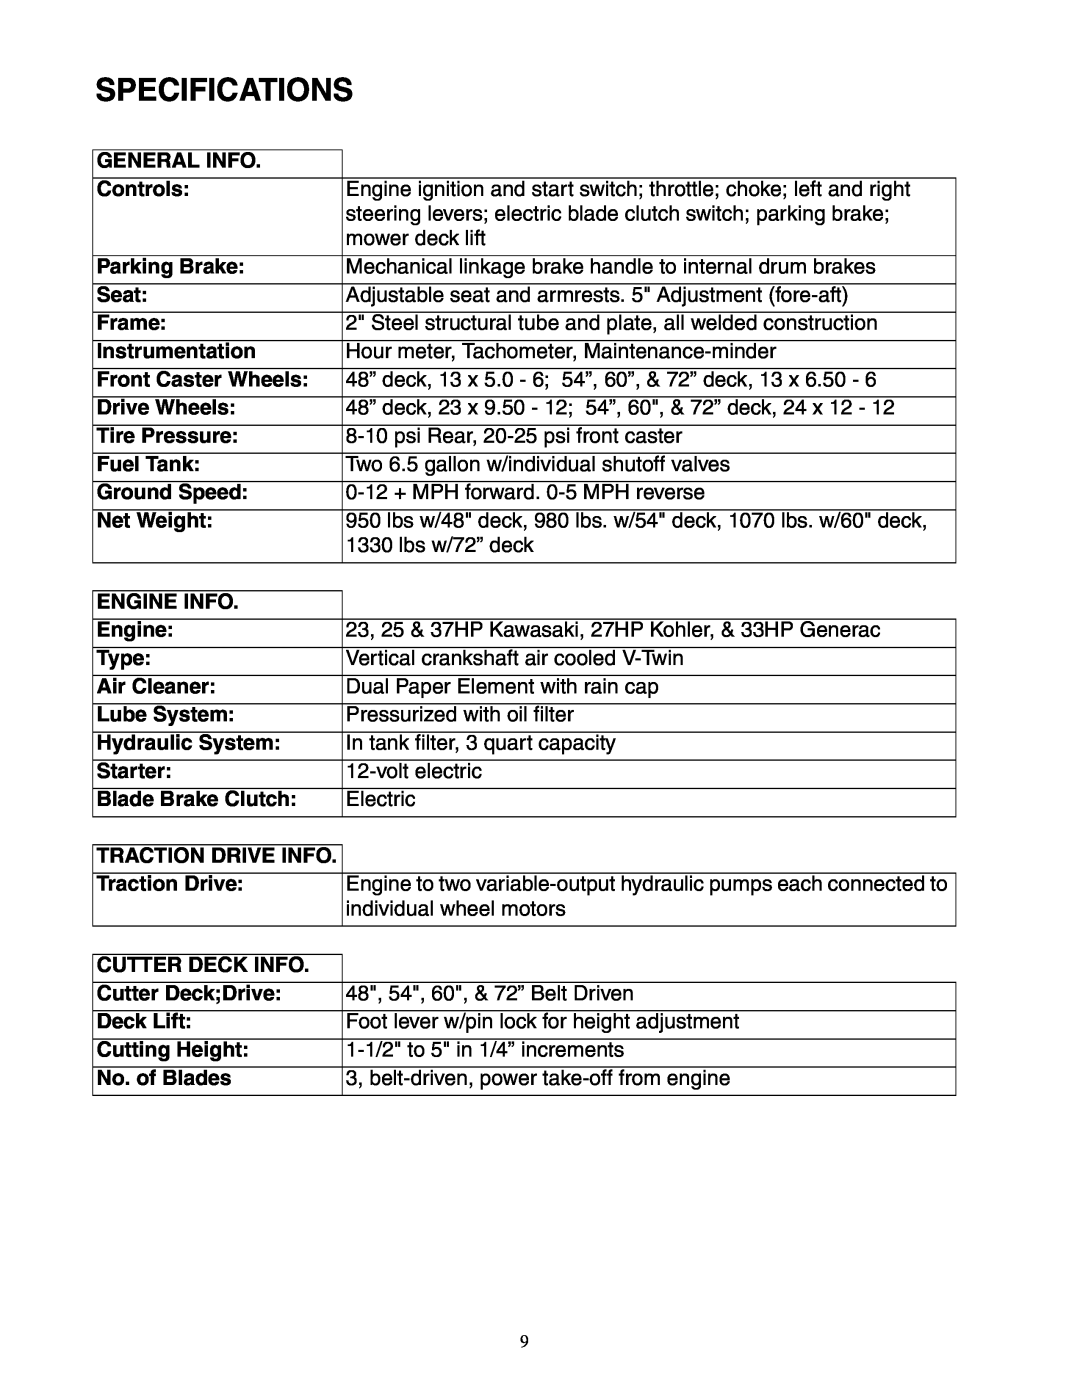 Cub Cadet 48-inch/54-inch/60-inch/72-inch service manual Specifications 